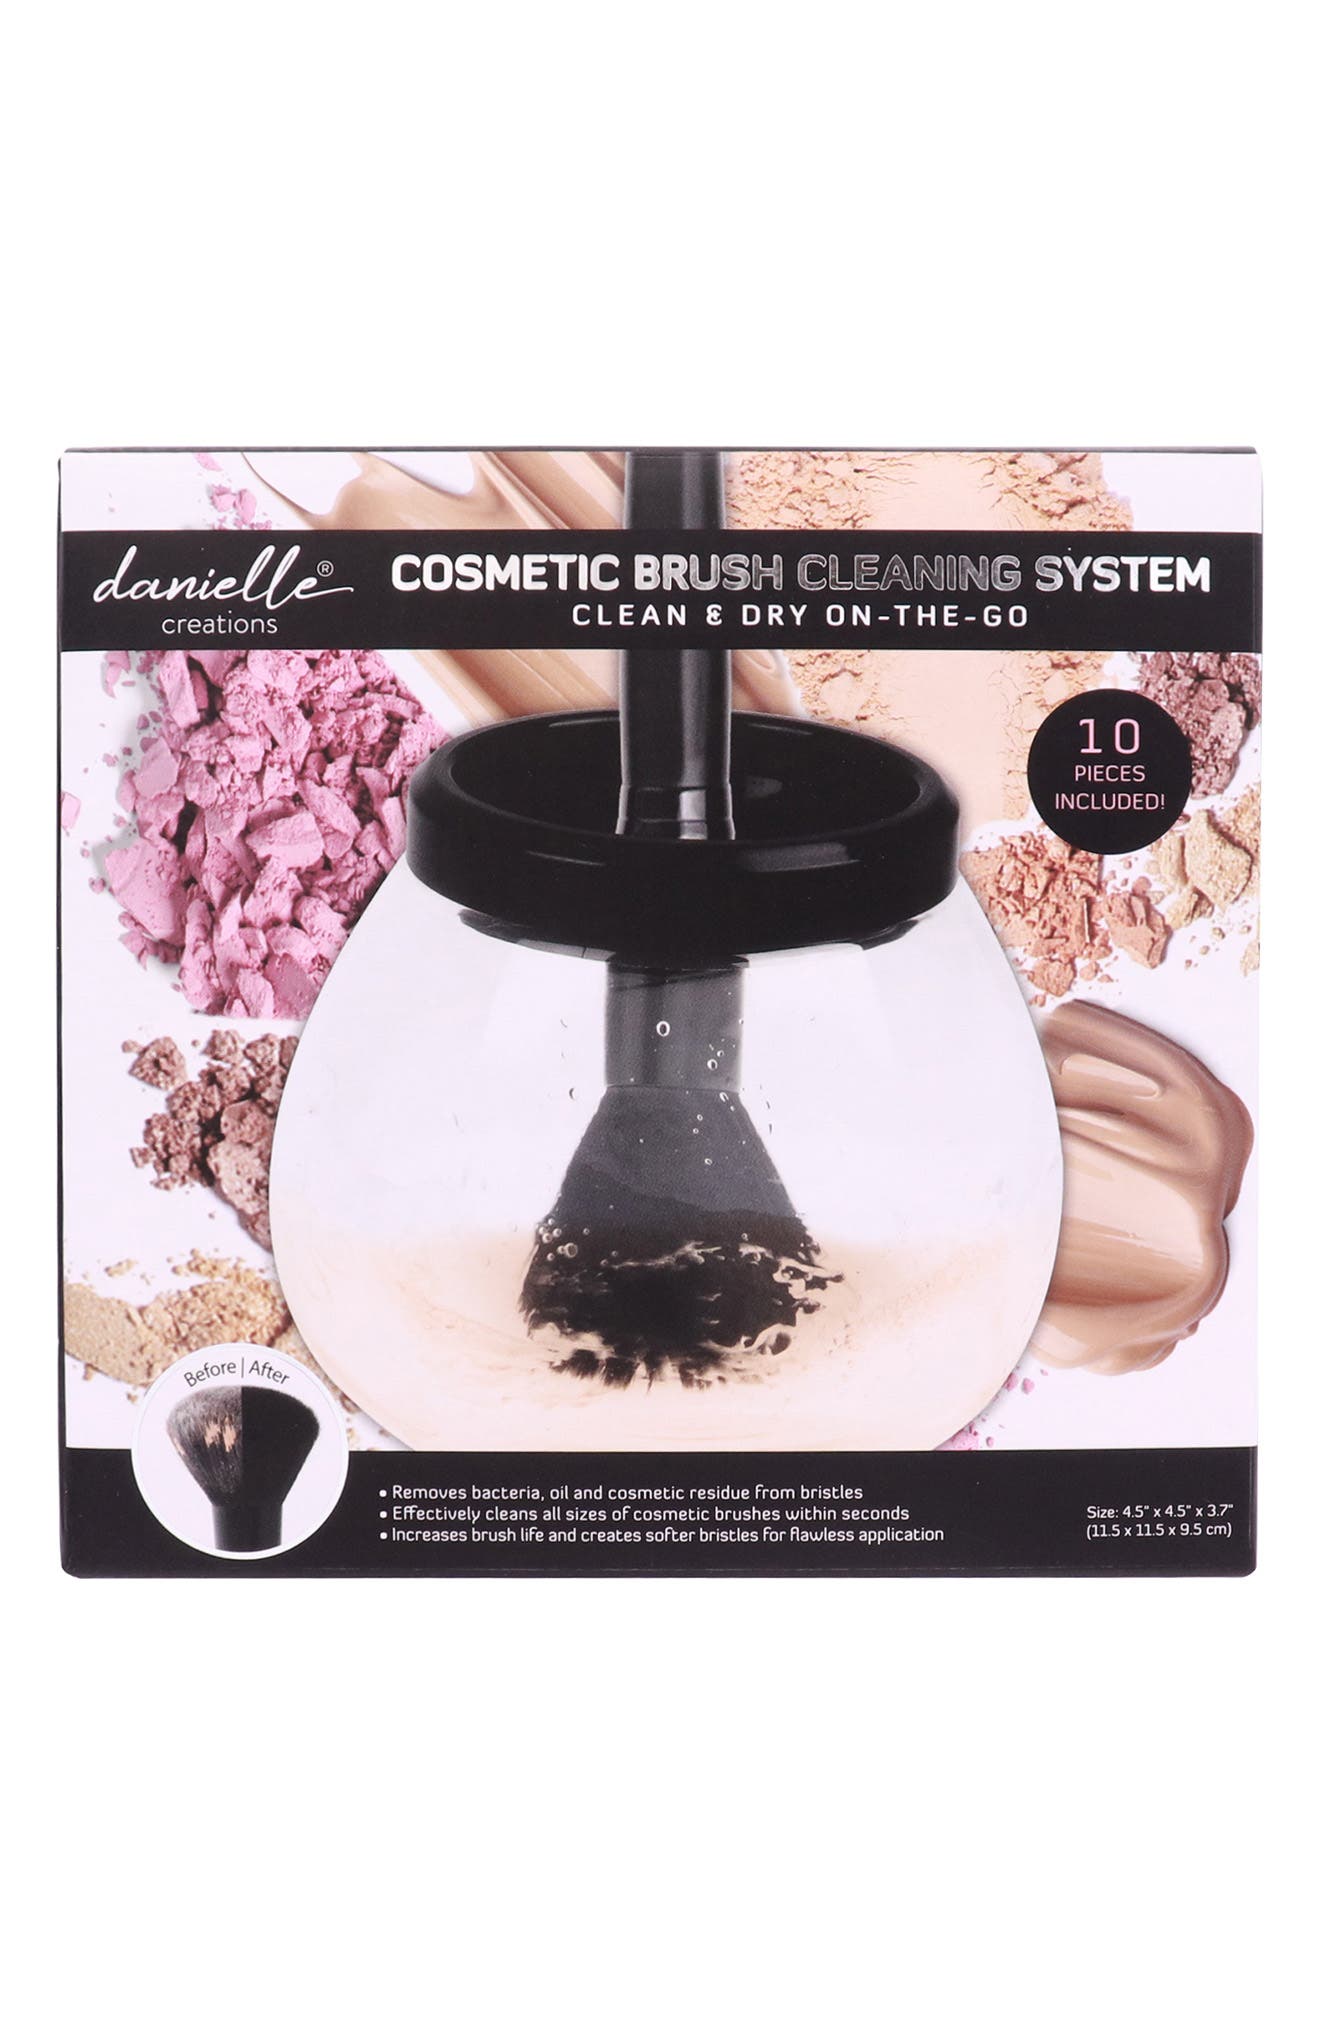 9-Piece Cosmetic Brush Cleaning System DANIELLE